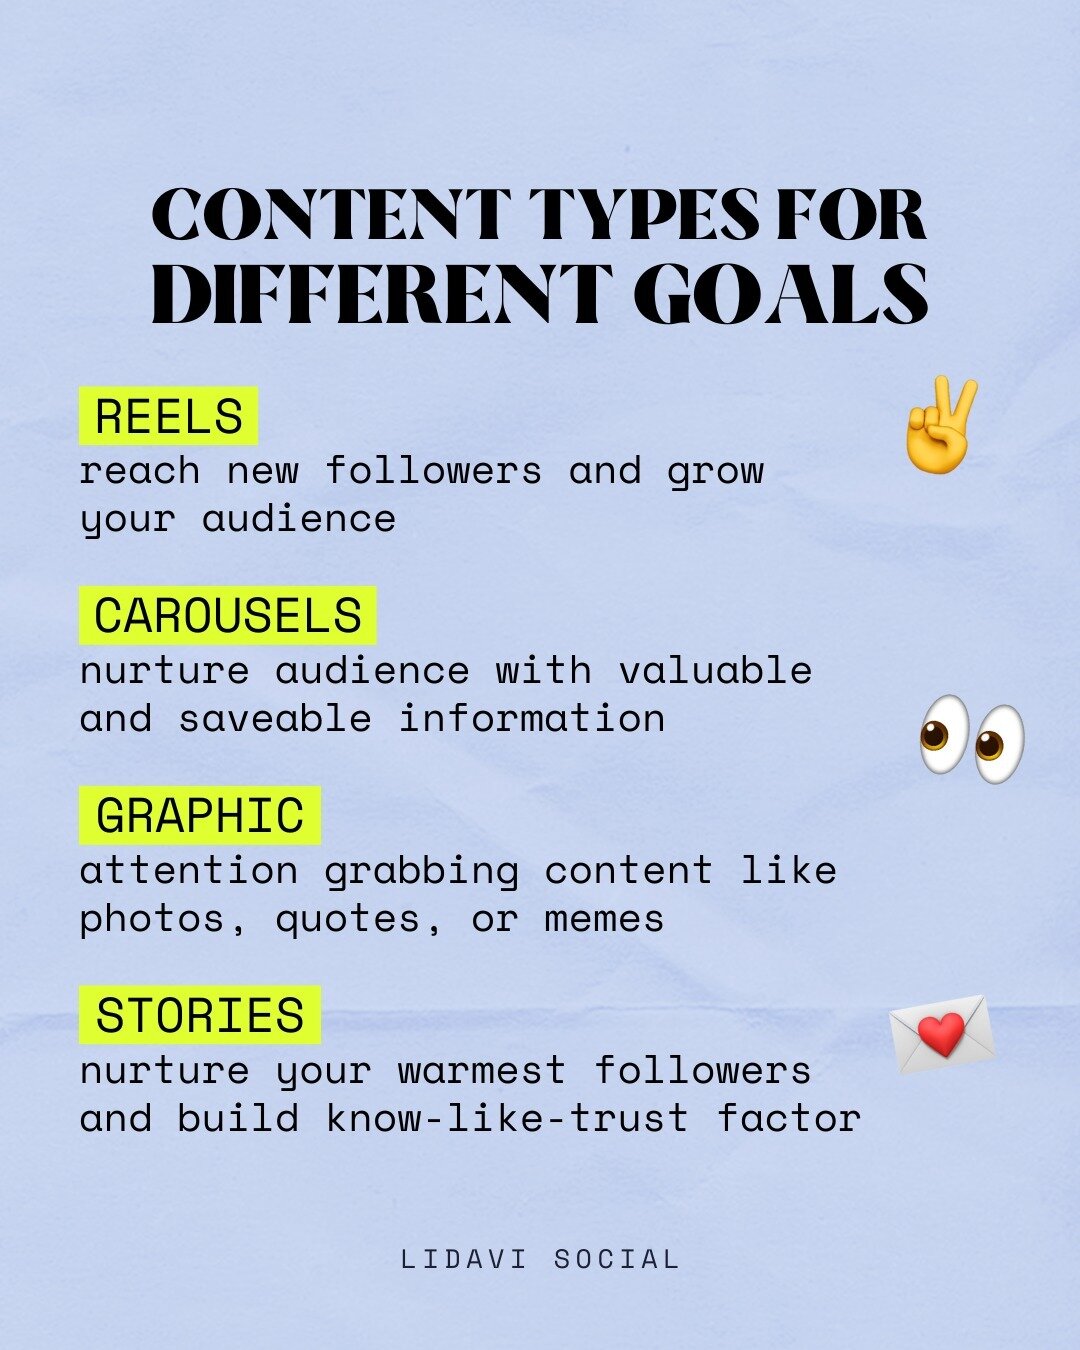 different content types ➡️ different goals!⁠
⁠
creating content with specific goals in mind will also help you to measure its effectiveness. 🧐⁠
⁠
swipe 👈 to check the best types of content to post on Instagram based on your goals.⁠
⁠
what's your fa